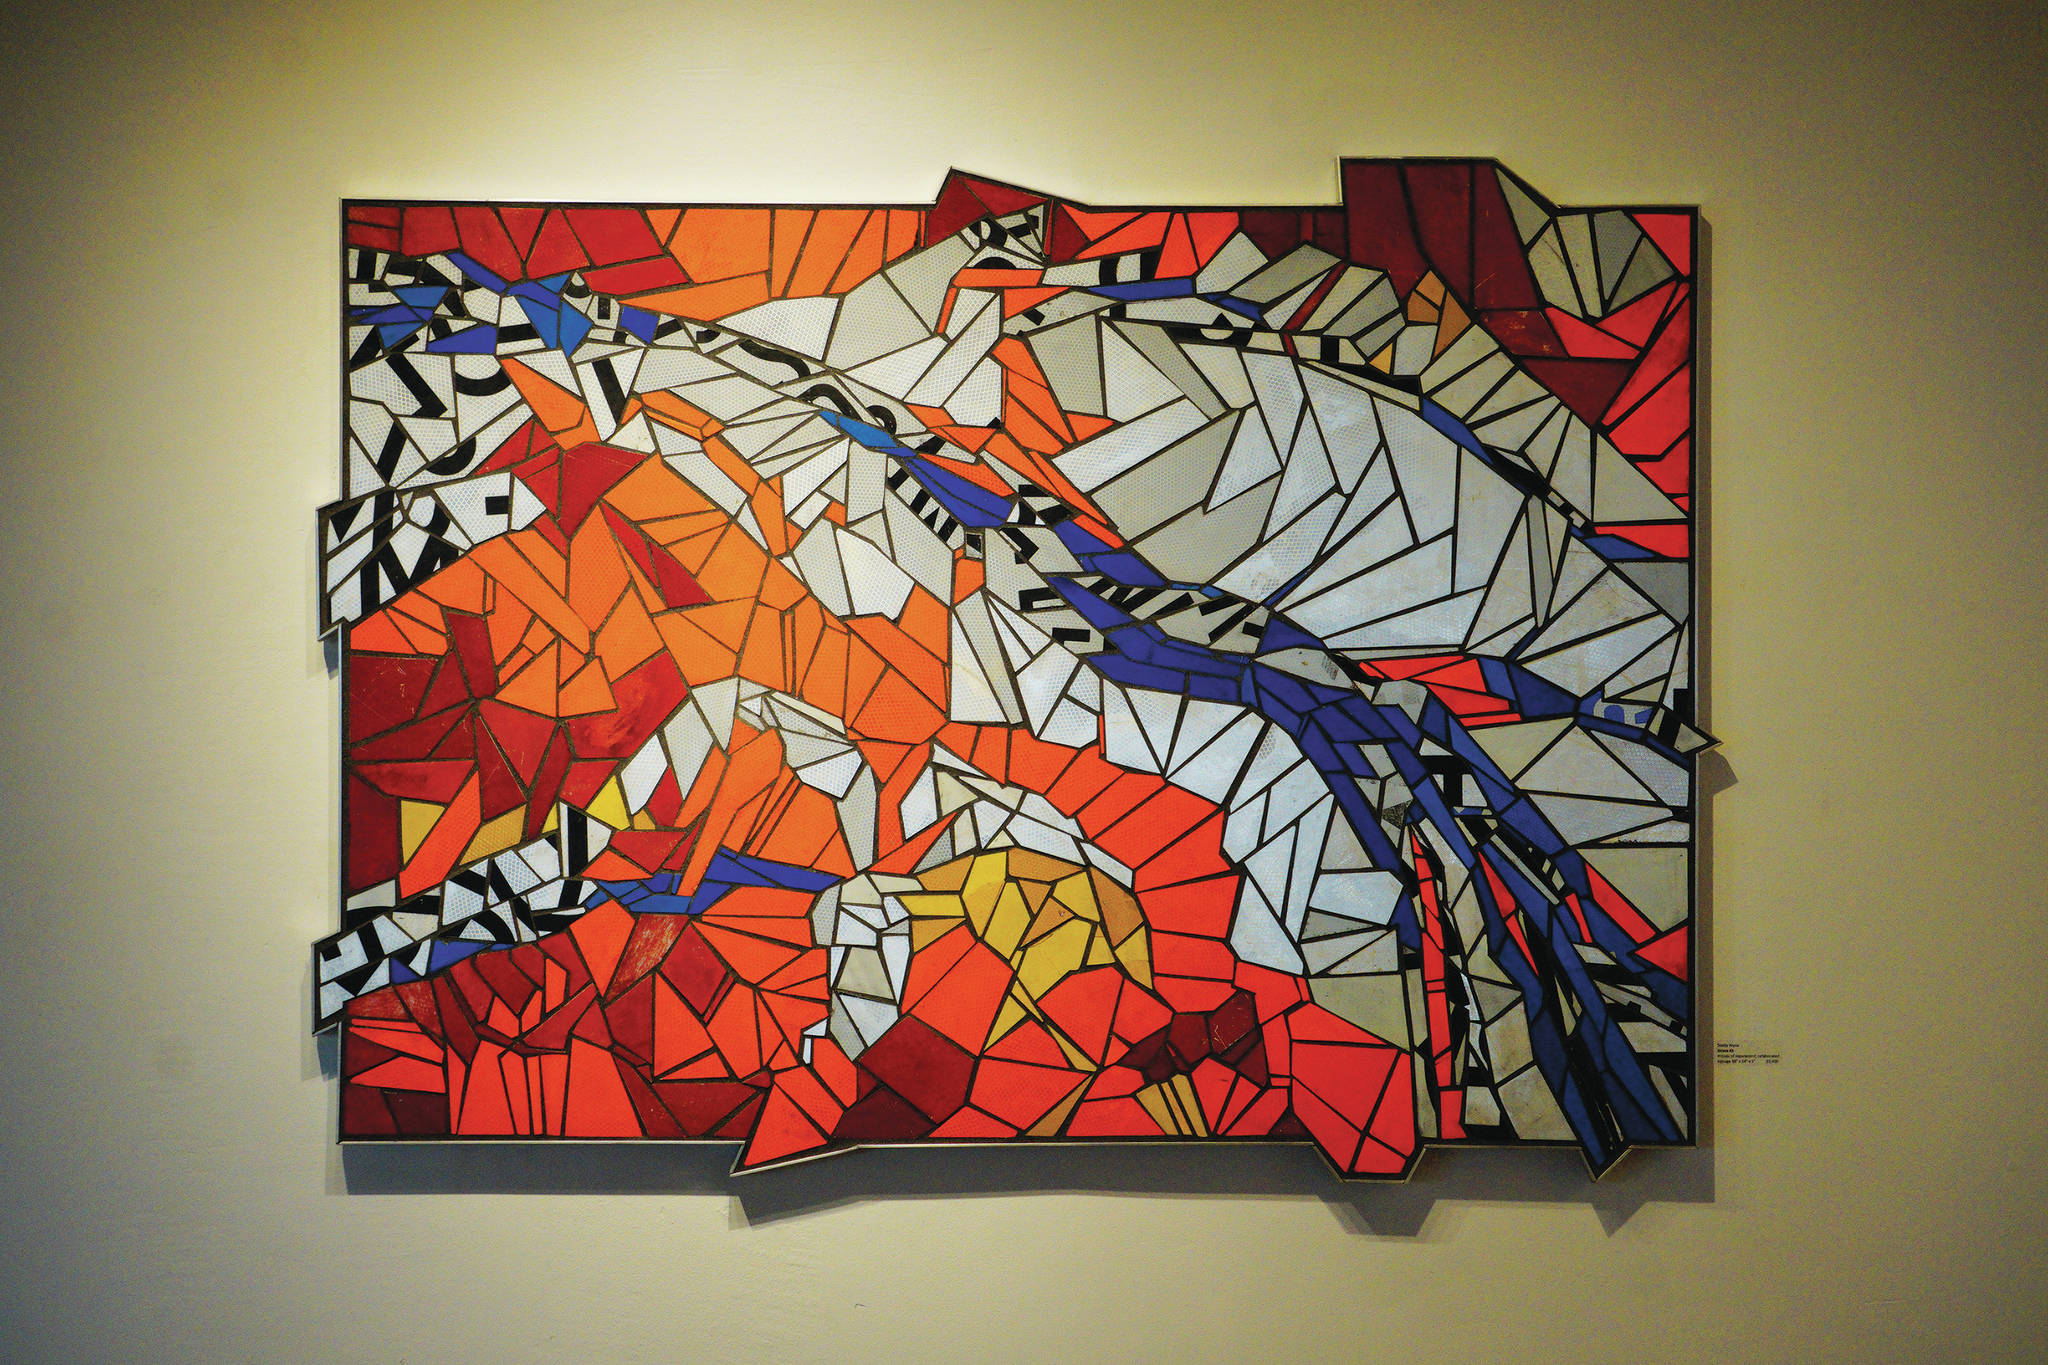 Sheila Wyne's "Strata #3" is part of her show that opened Friday, Aug. 6, 2021, at Bunnell Street Arts Center. (Photo by Michael Armstrong/Homer News)